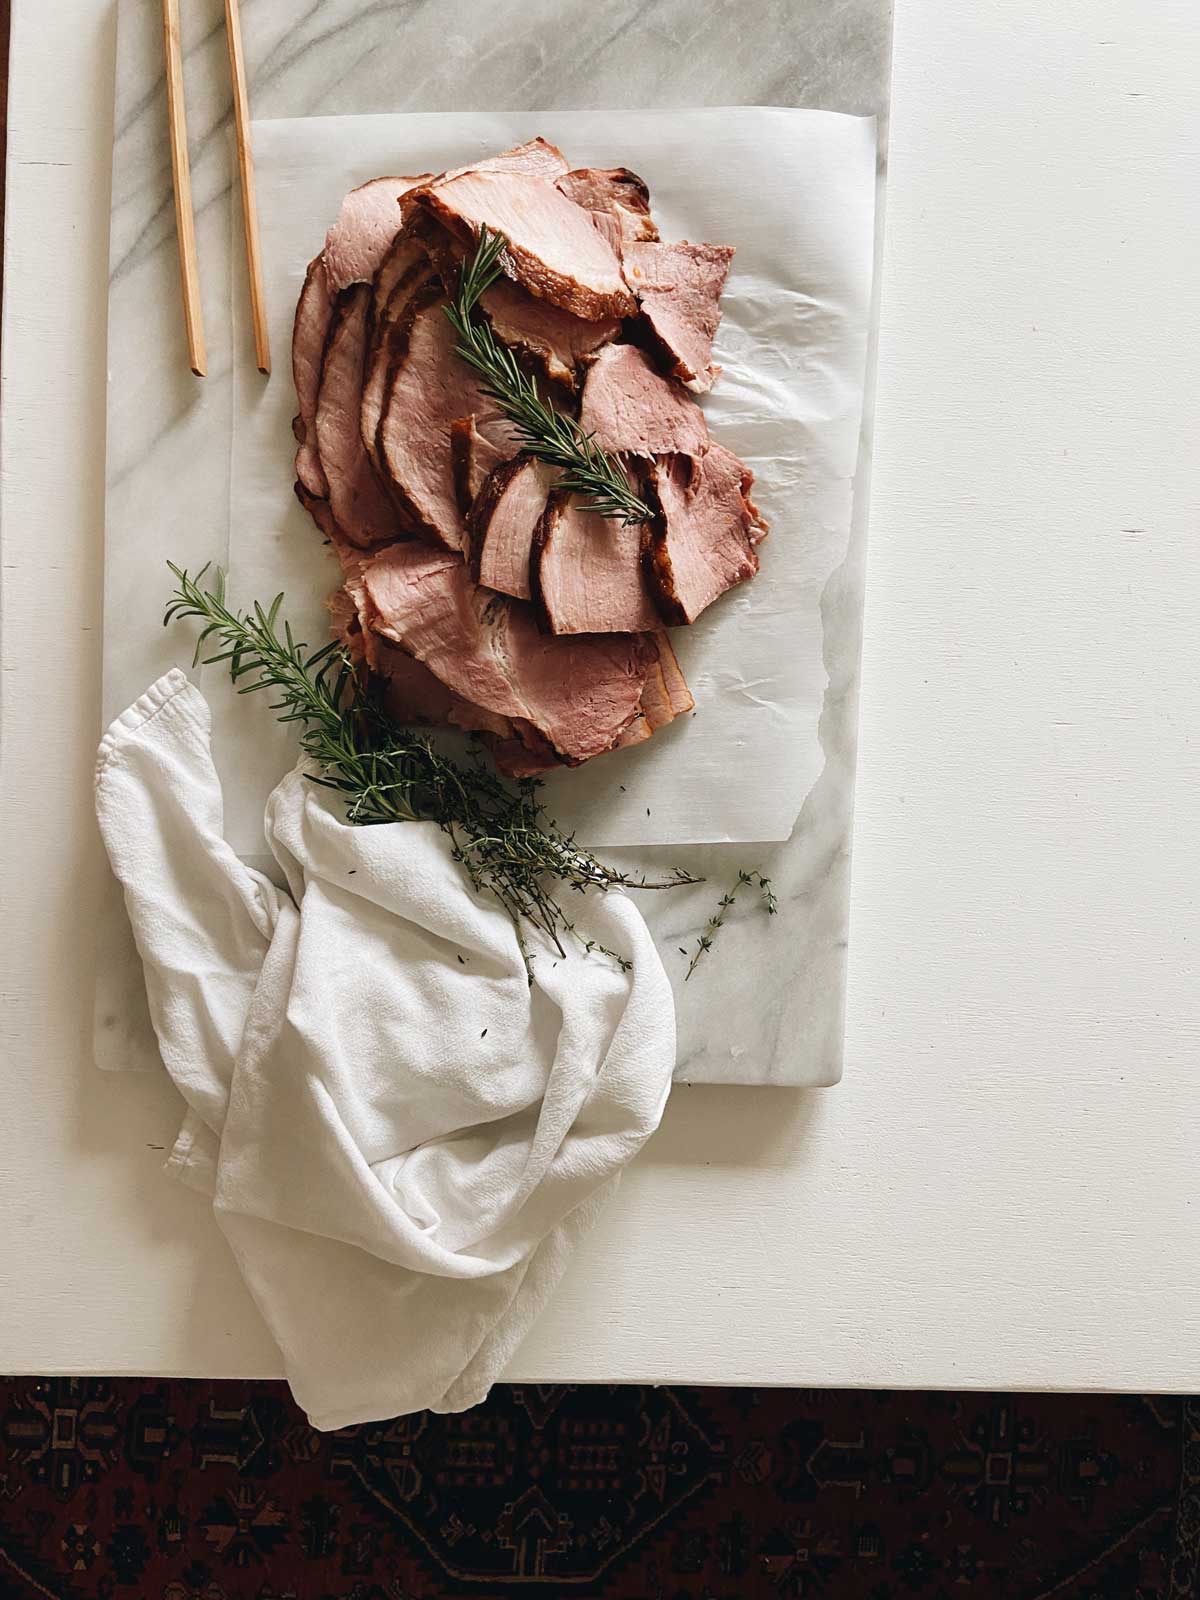 THE HAM MY HUSBAND WANTS FOR EASTER EVERY YEAR